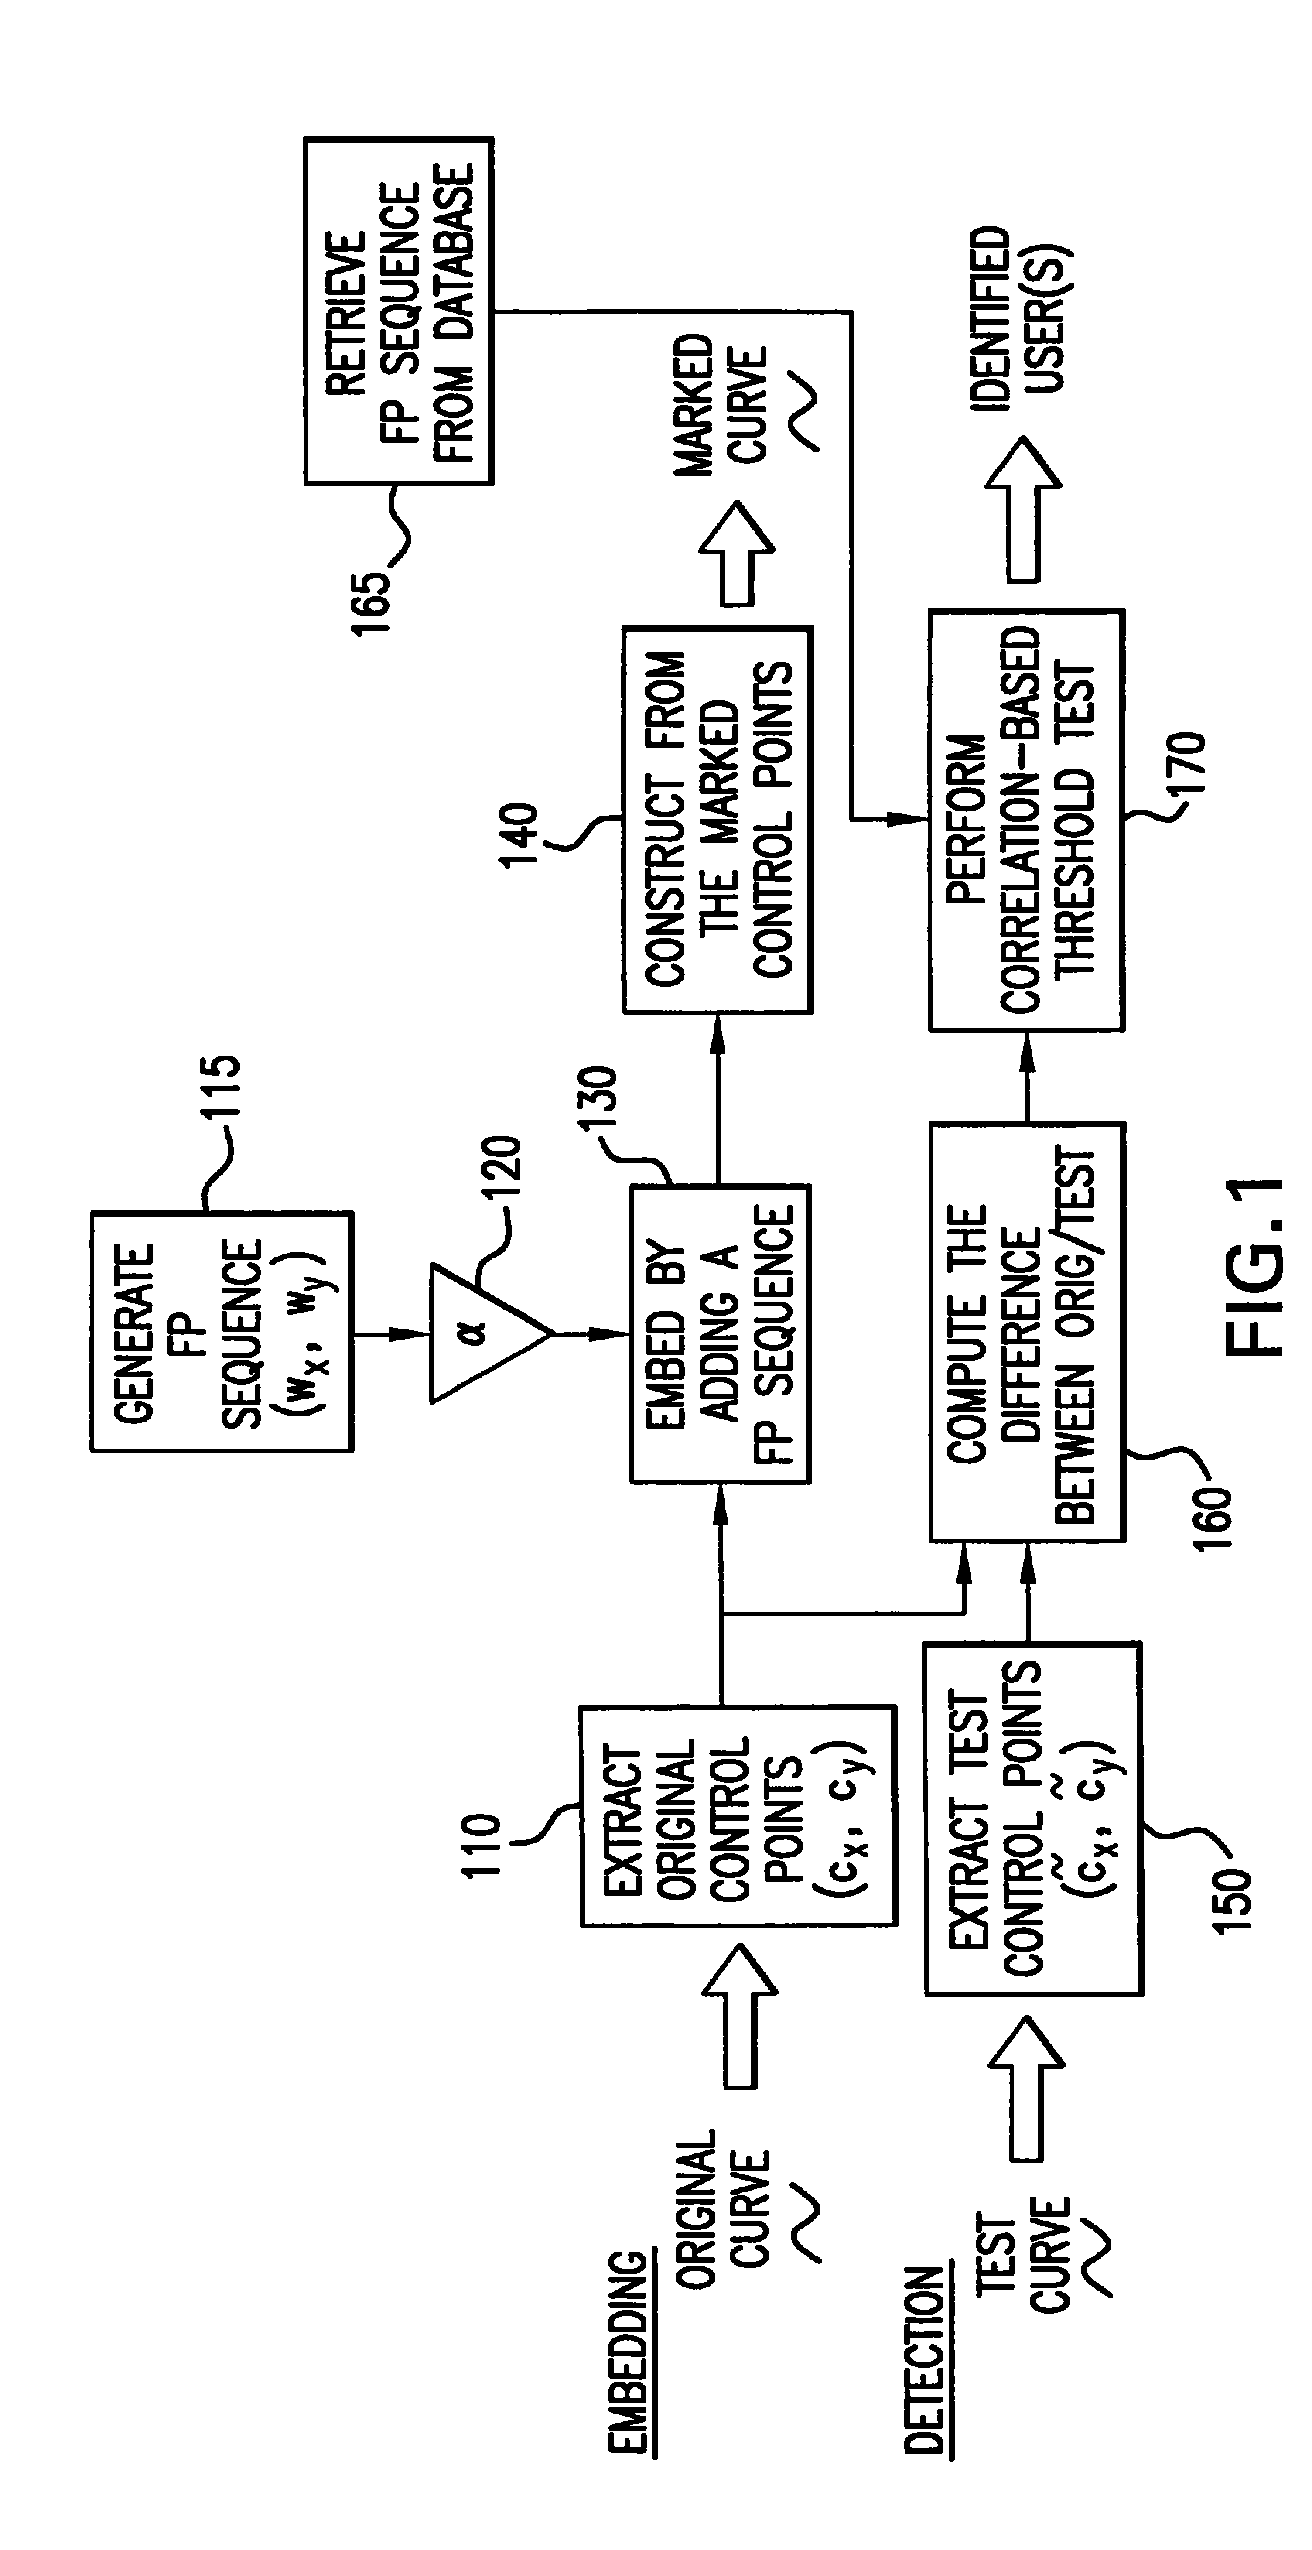 Method for concealing data in curves of an image